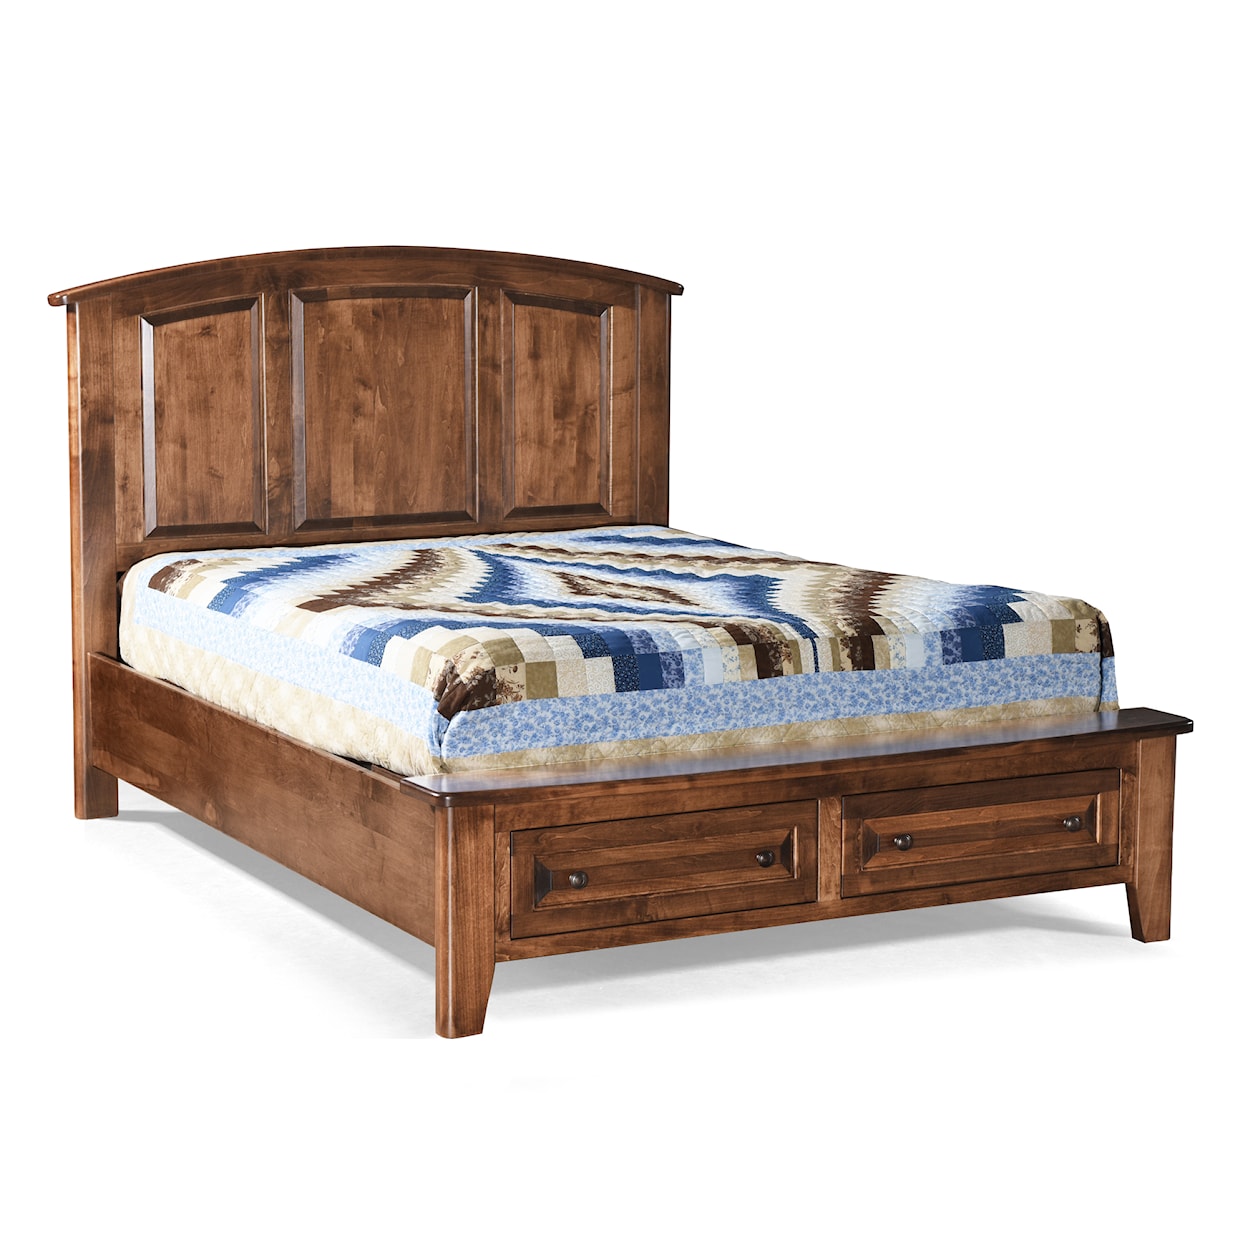 Archbold Furniture Carson Queen Arched Bed with Footboard Storage